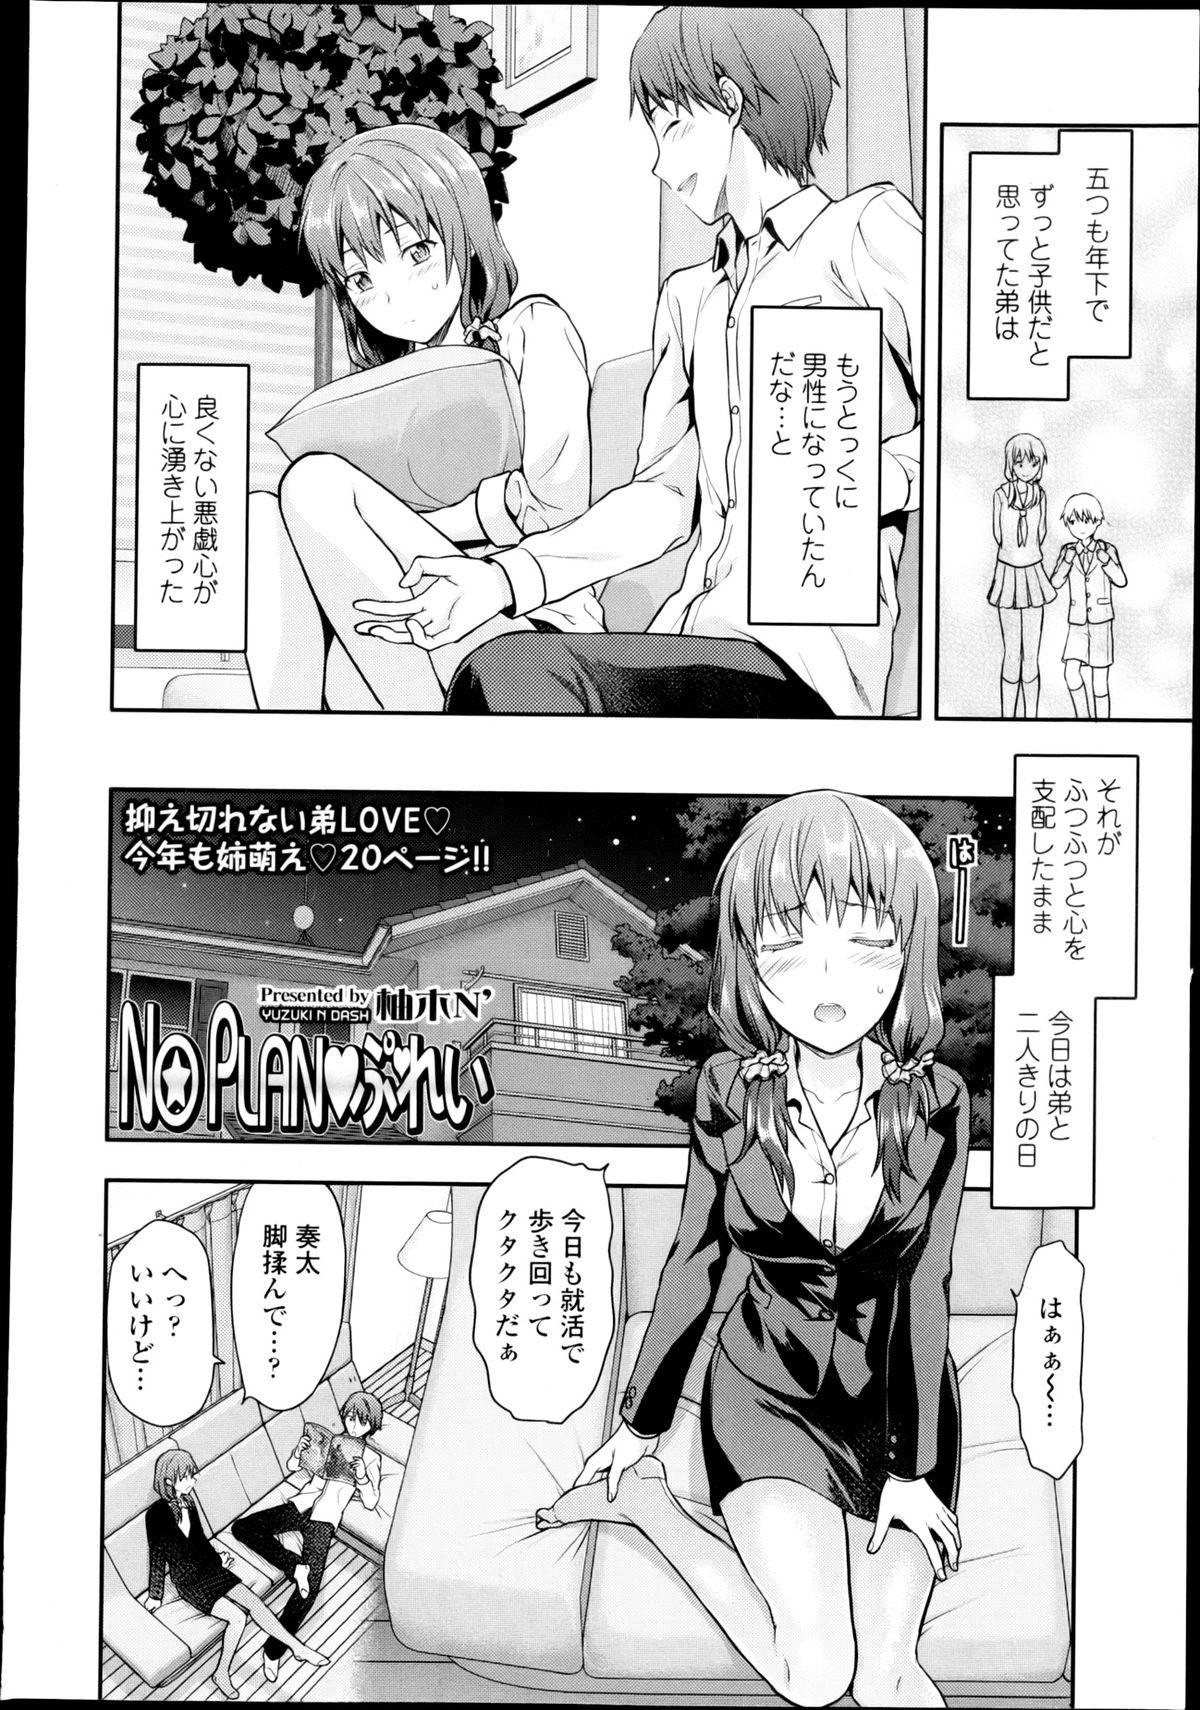 Anale COMIC Tenma 2013-03 18 Year Old - Page 6